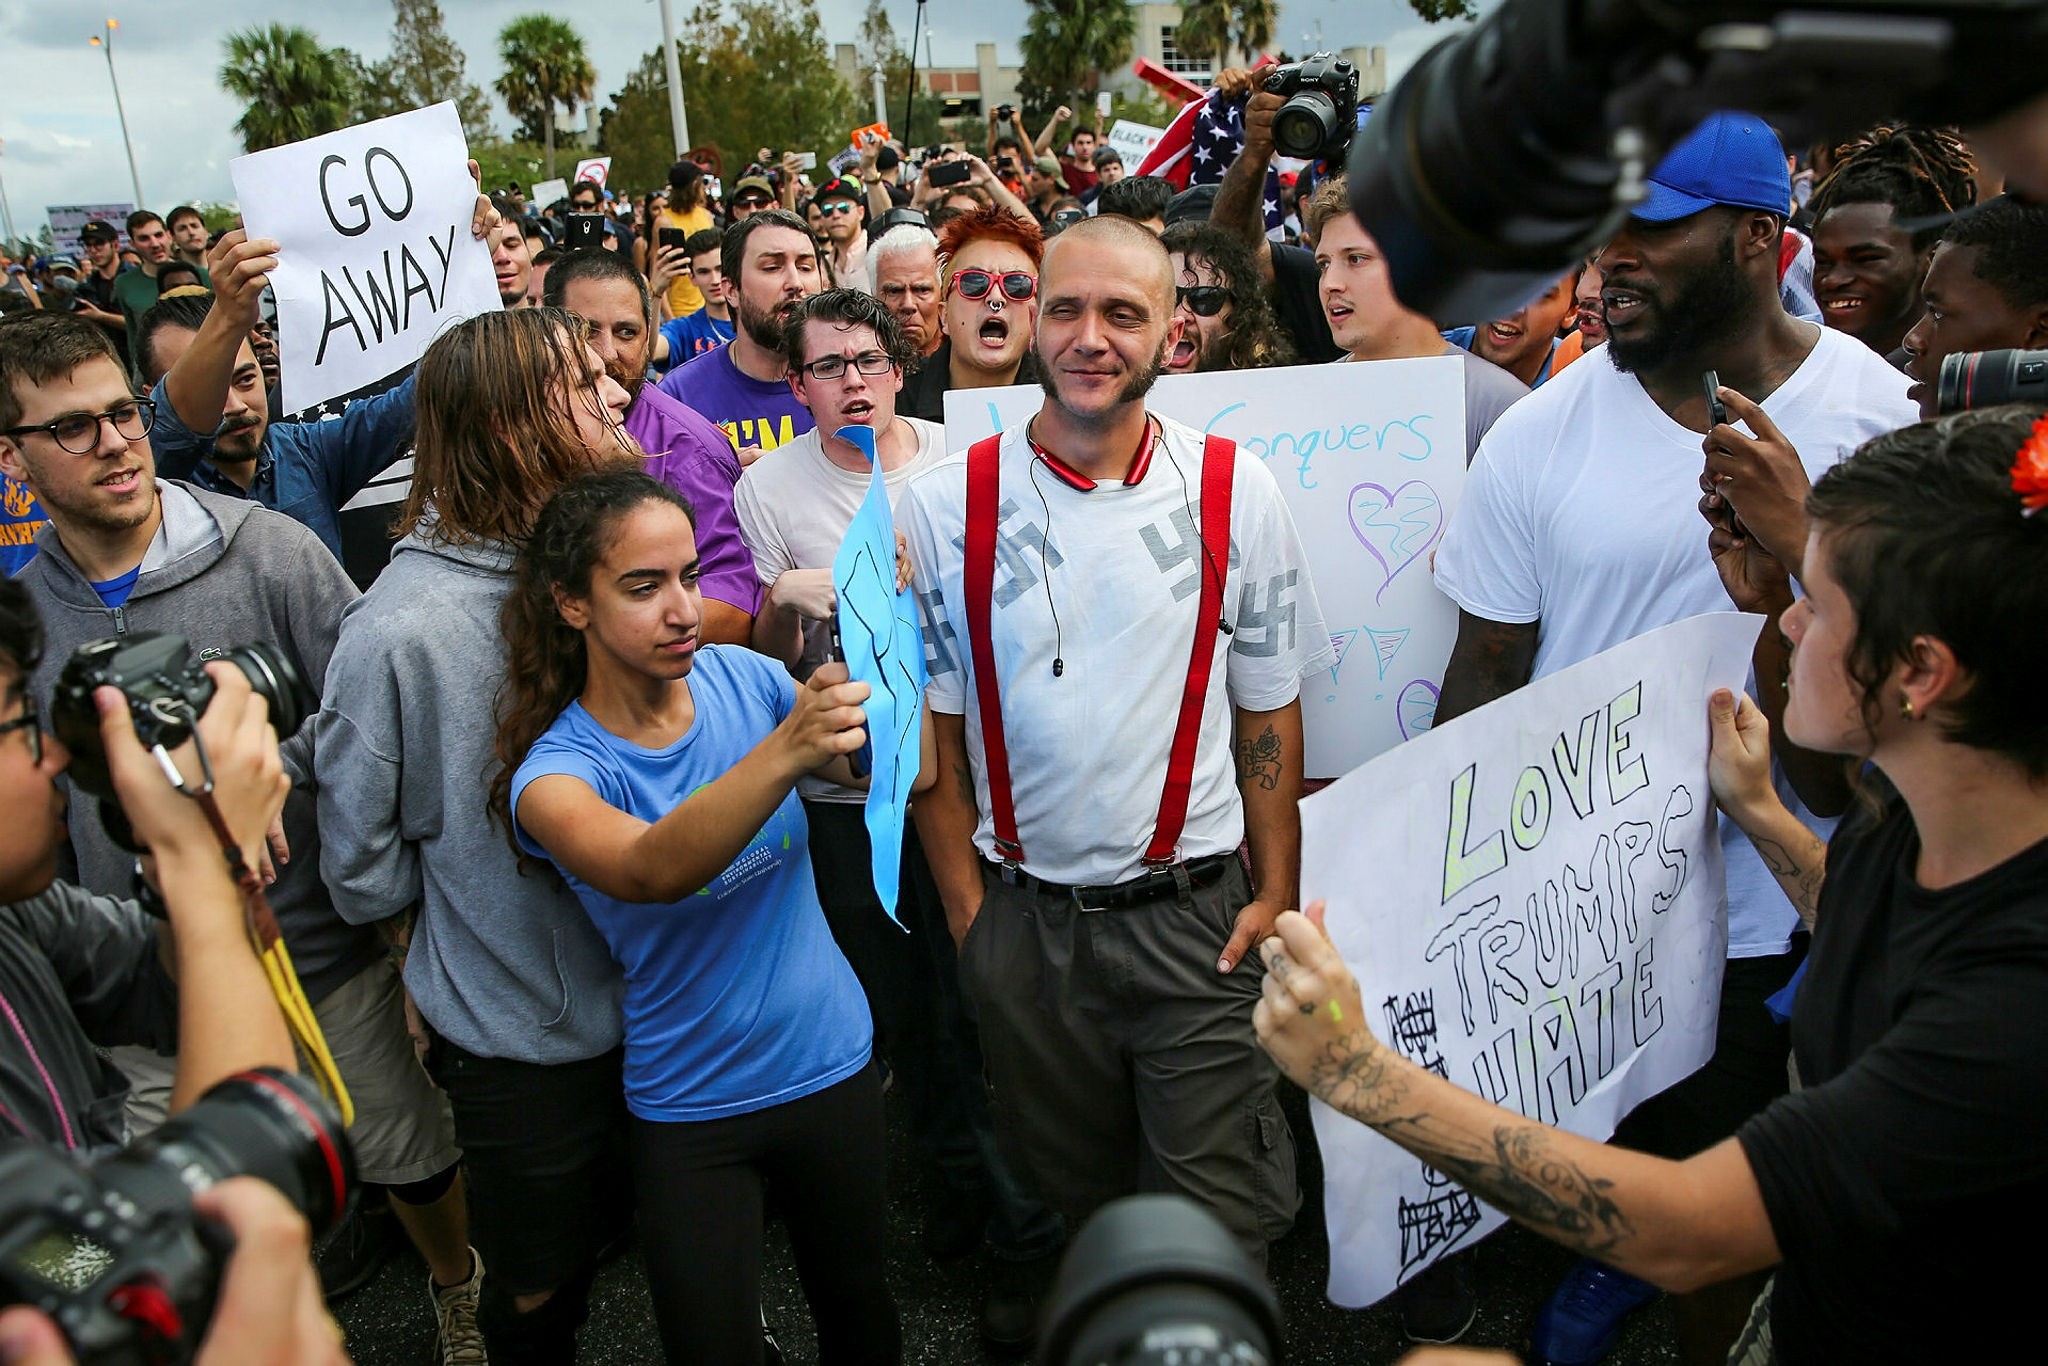 Protesters confront a man wearing a shirt with swastikas outside a University of Florida auditorium where white nationalist Richard Spencer was preparing to speak, Oct. 19.